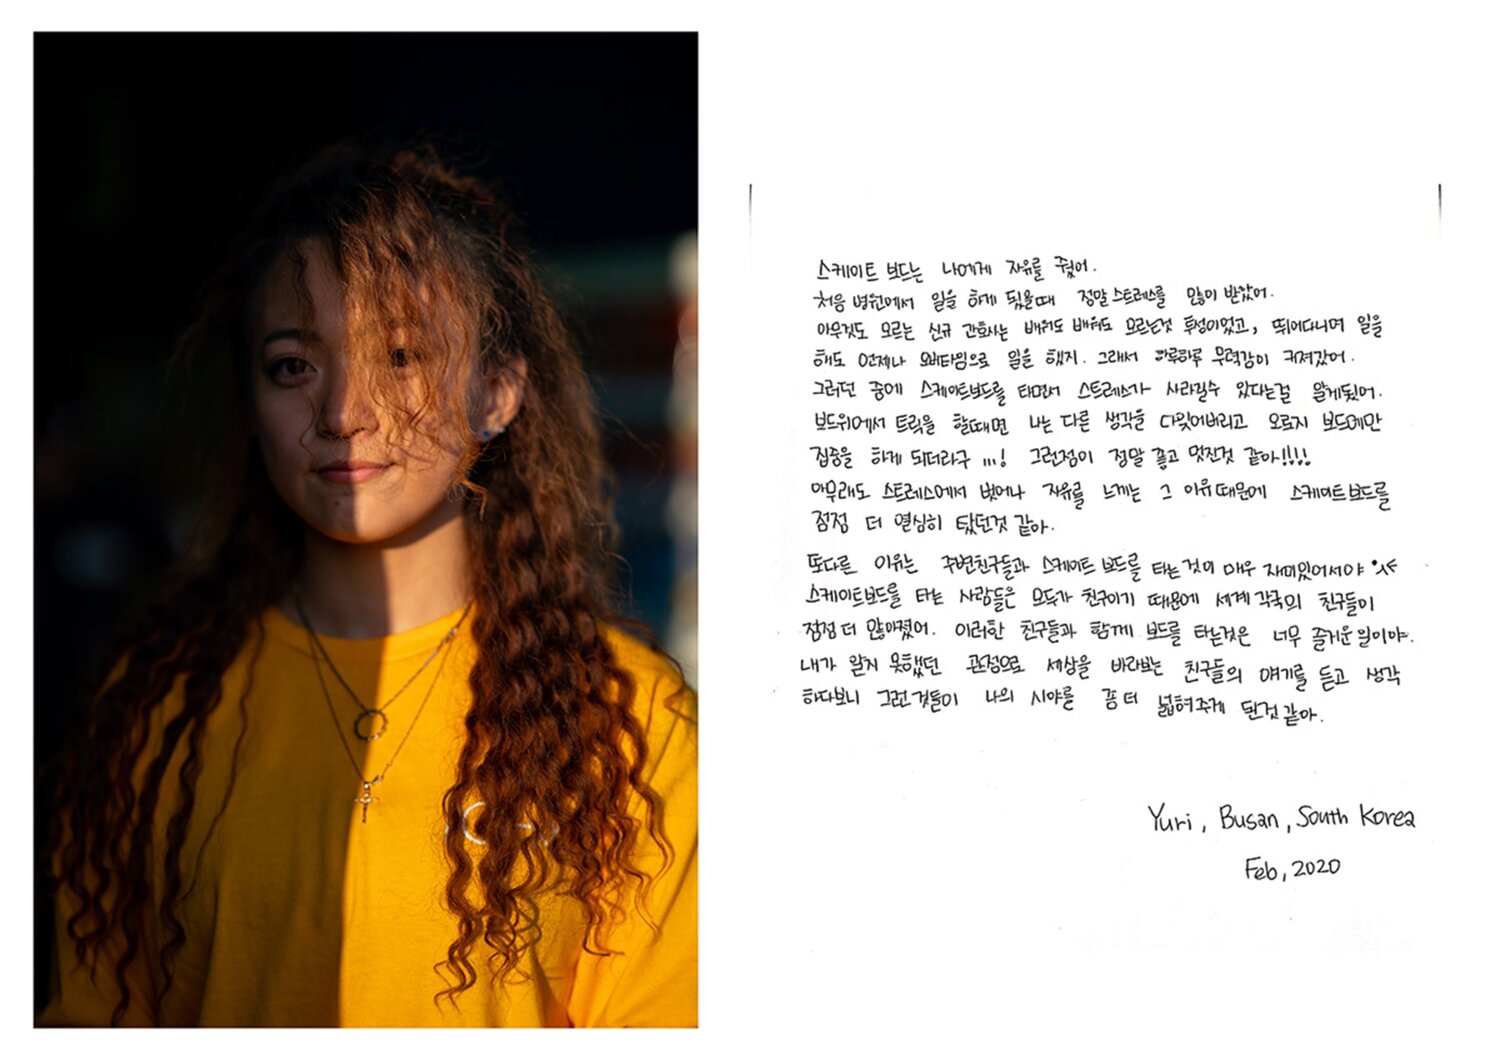 Yuri Lee is a nurse and known local skater in South Korea. She travelled to be part of The Skate Exchange, and event bringing female skaters together in Japan in 2018.